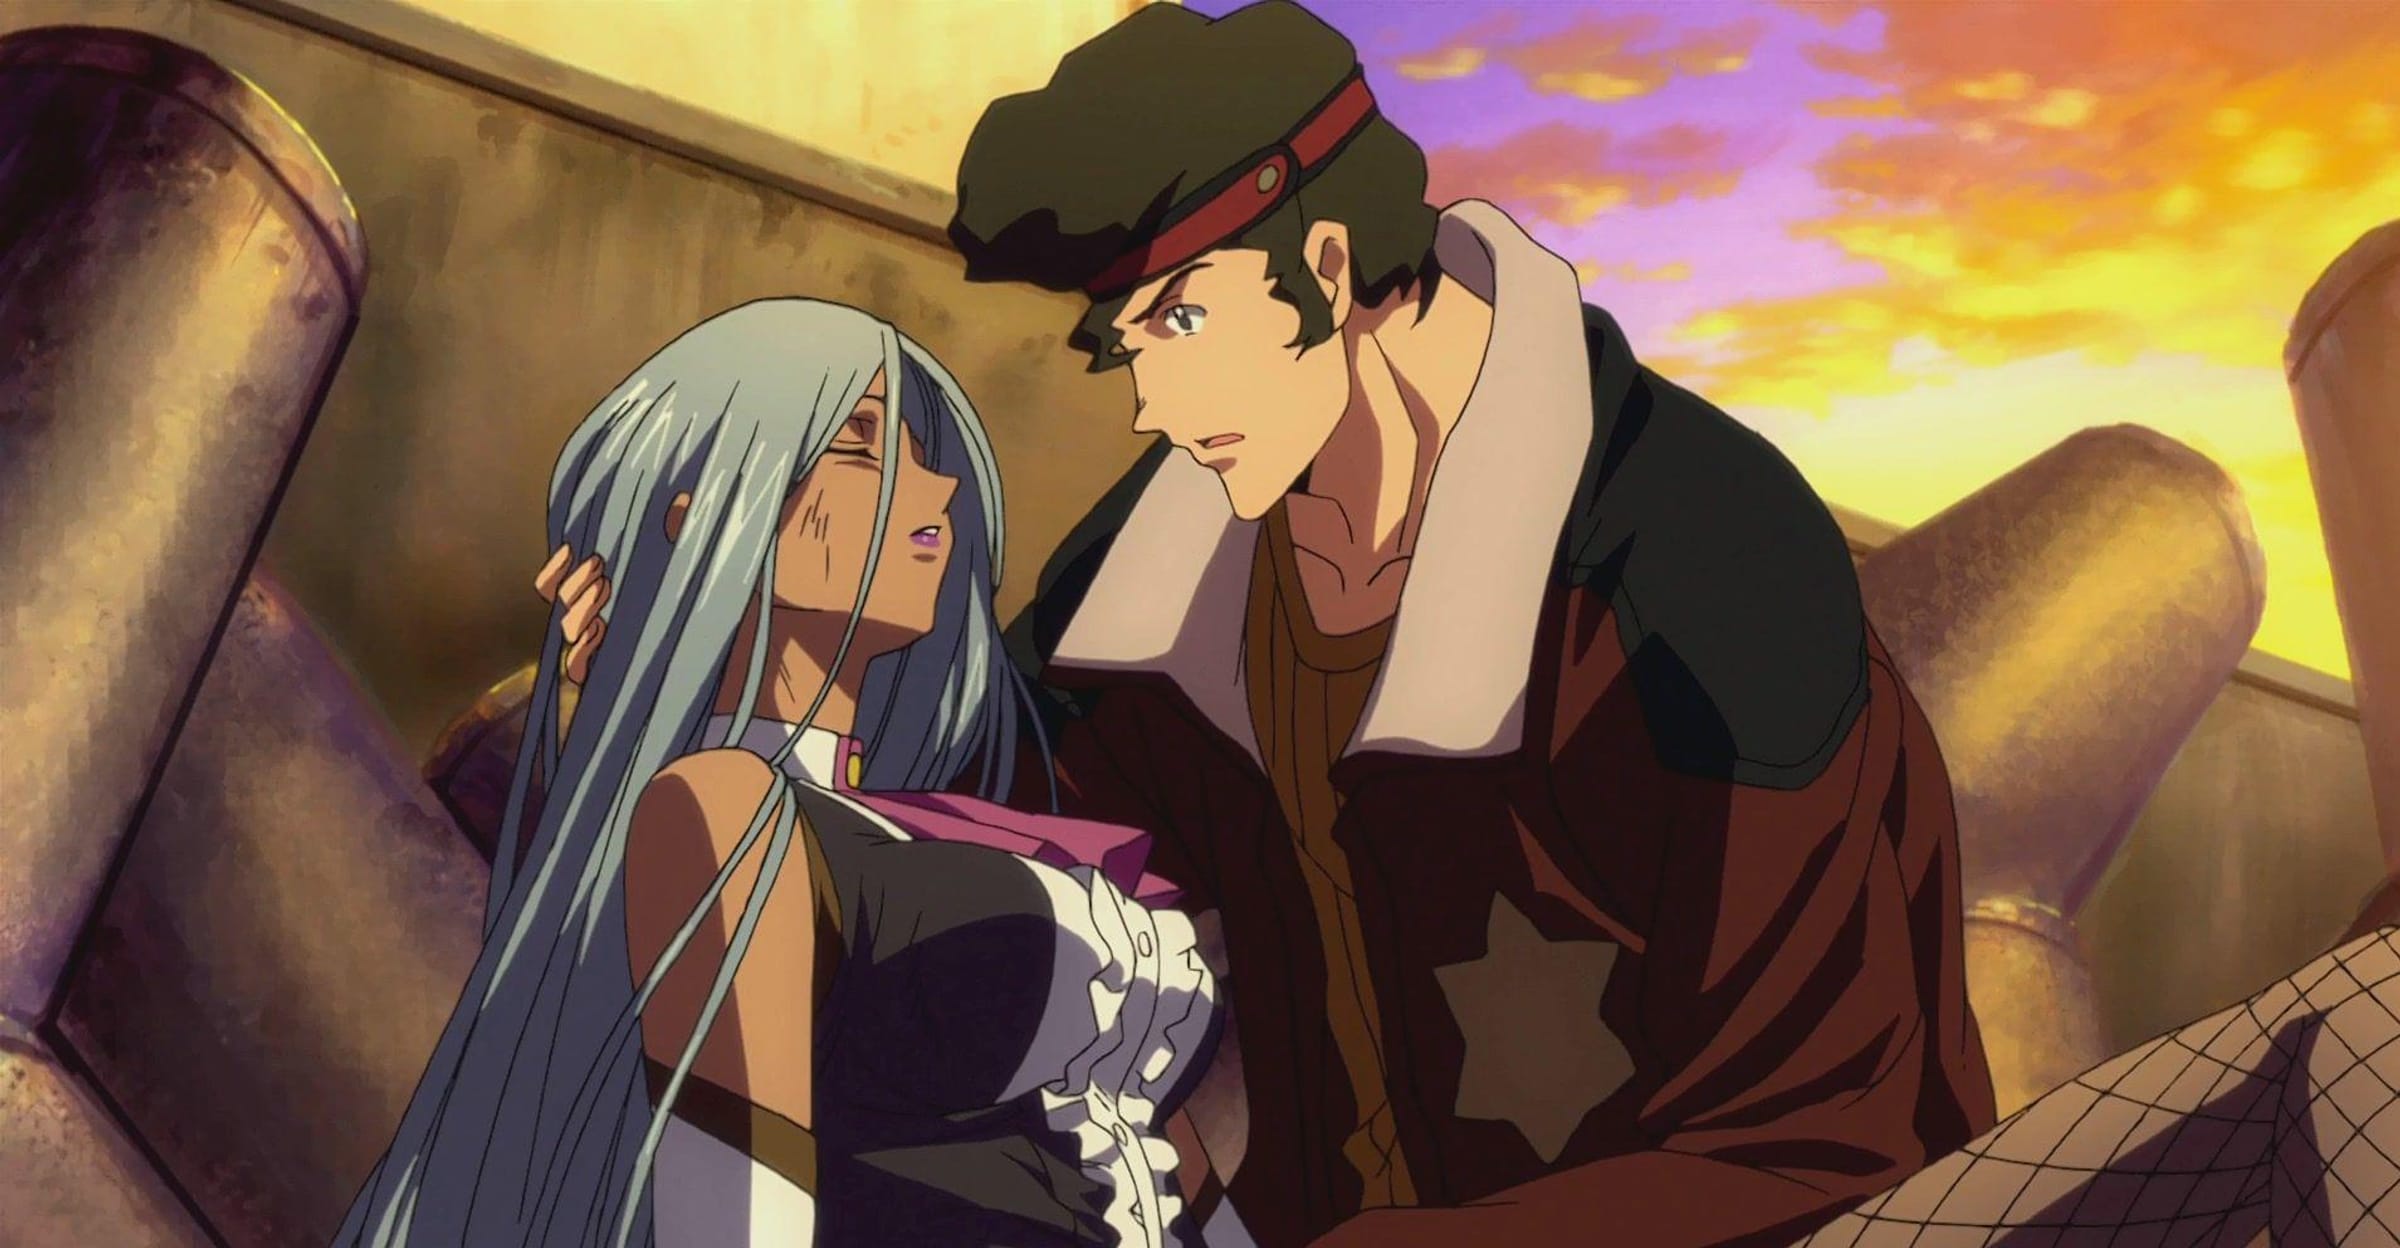 15 Romance Anime Where They Fake Being a Couple At First